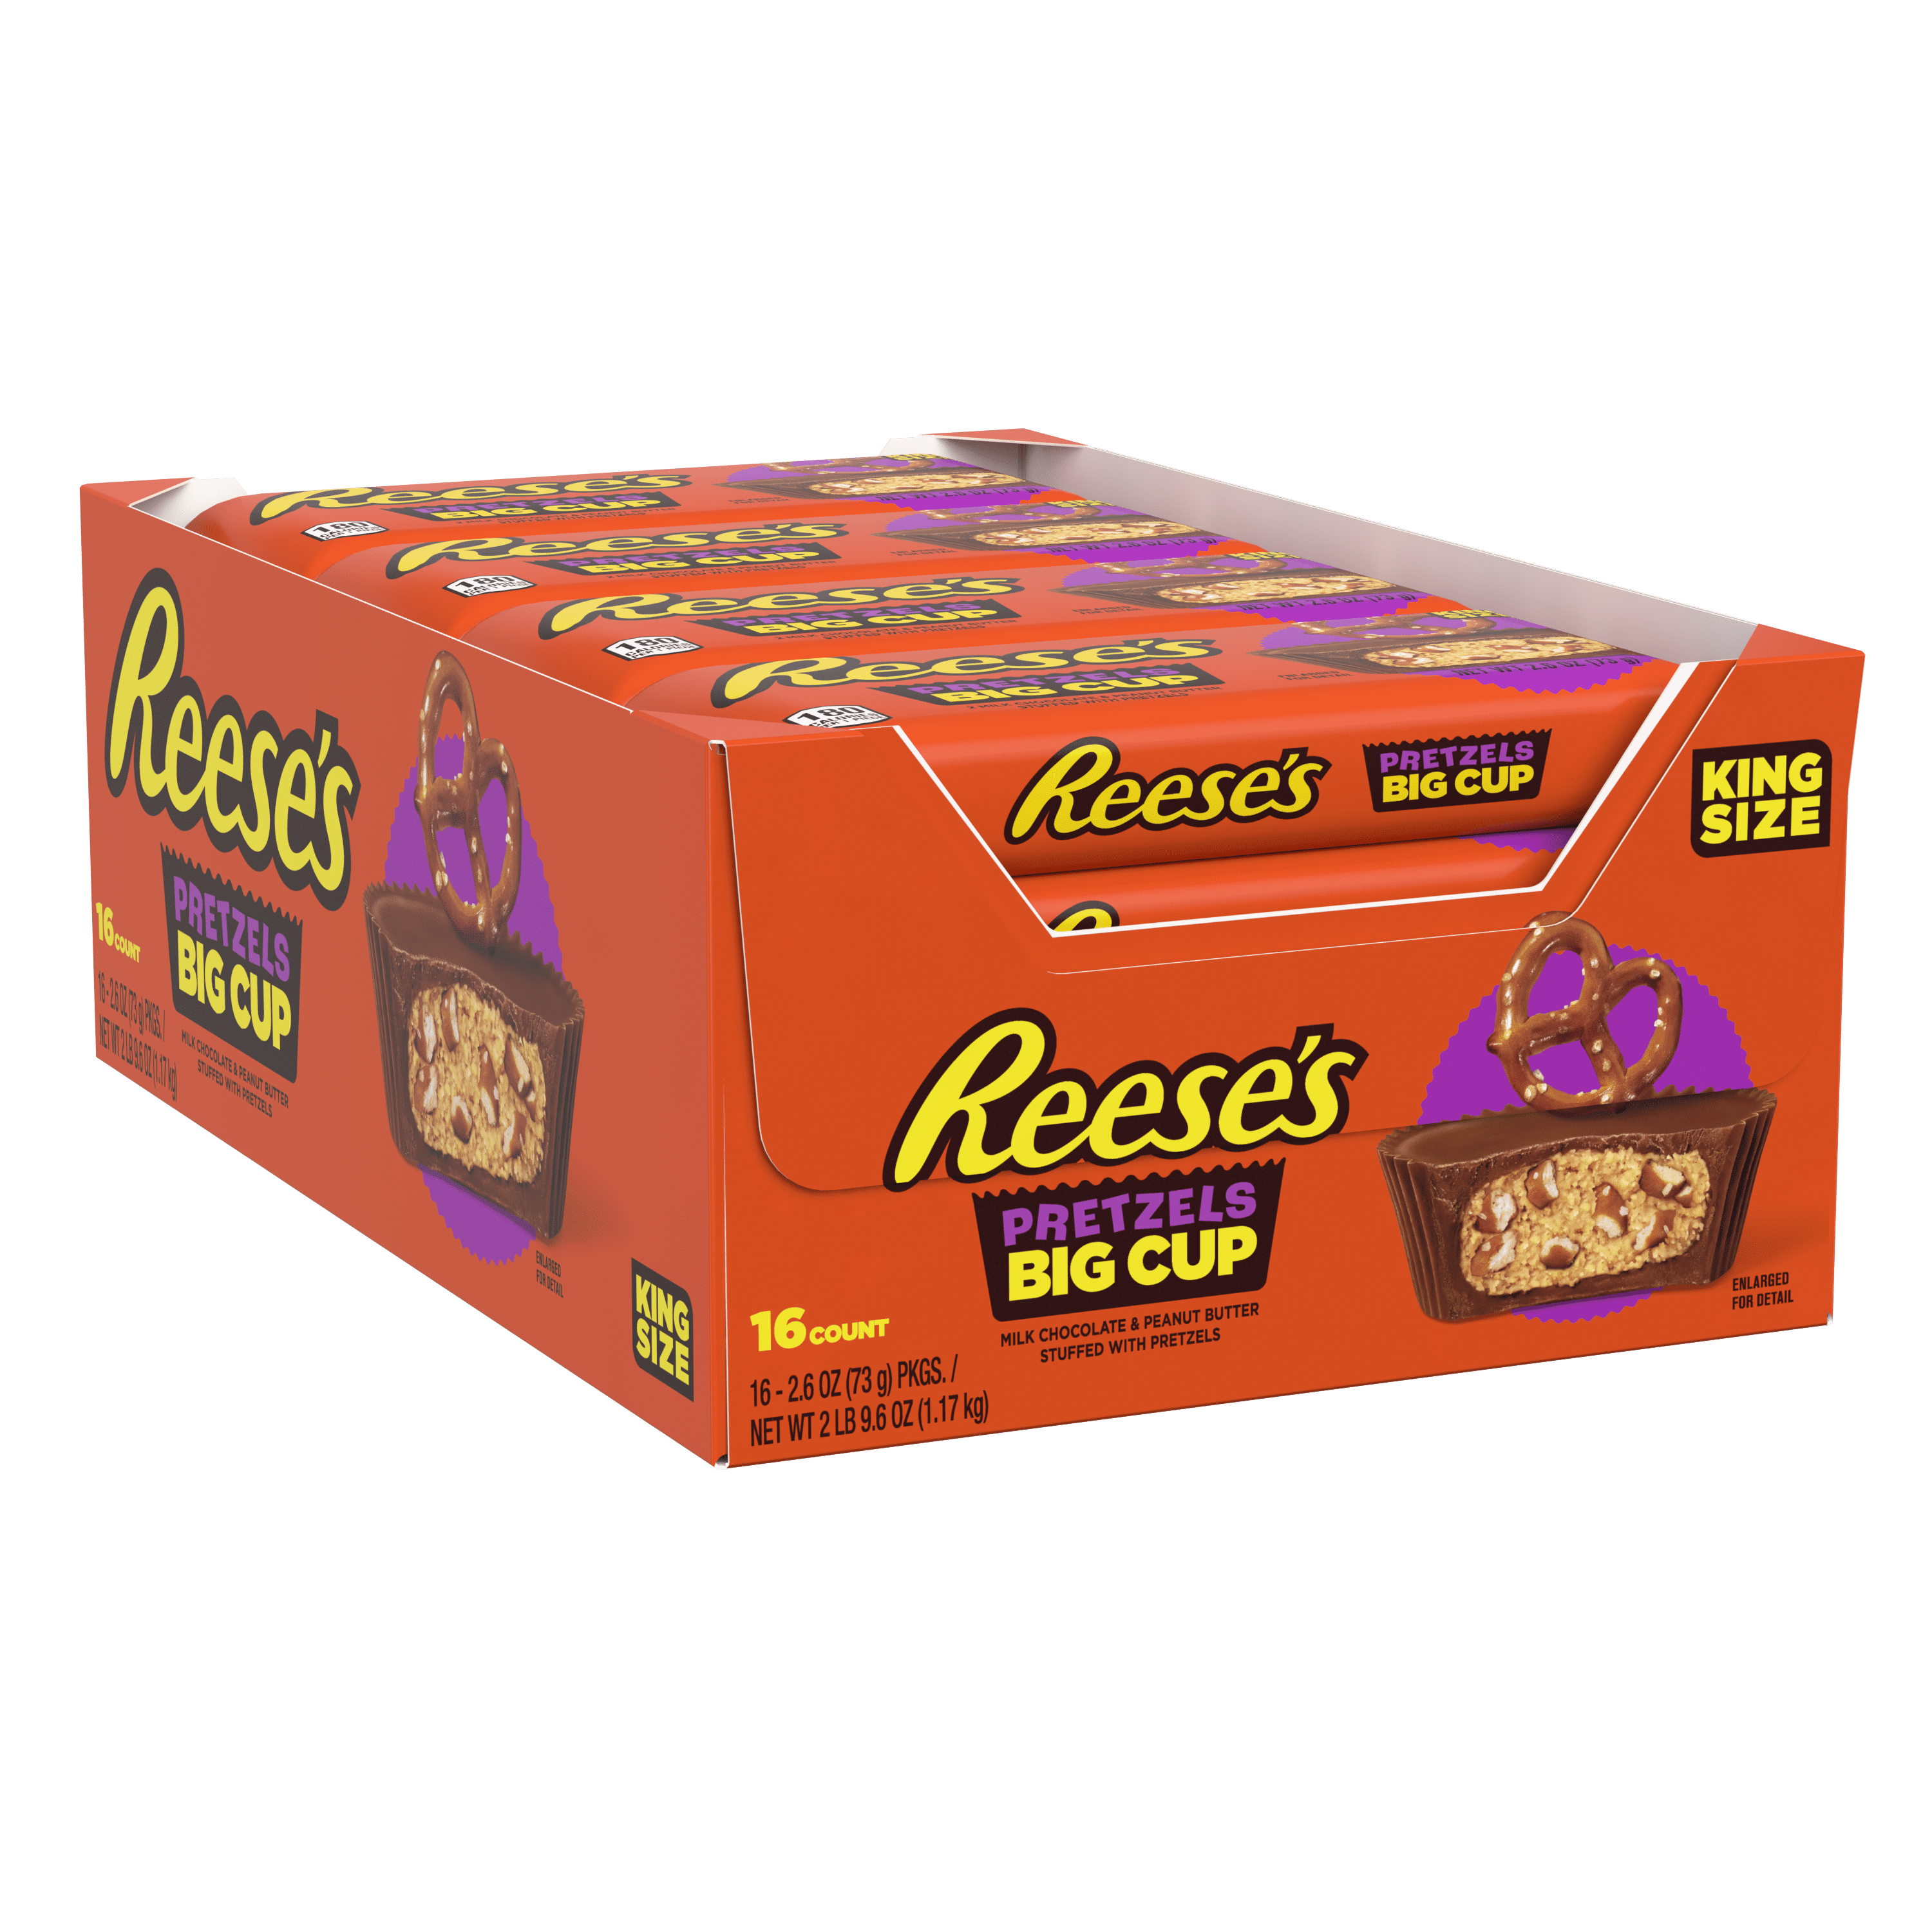 Reeses Big Cup Stuffed With Pretzels Milk Chocolate Peanut Butter Cups Candy Gluten Free 26 